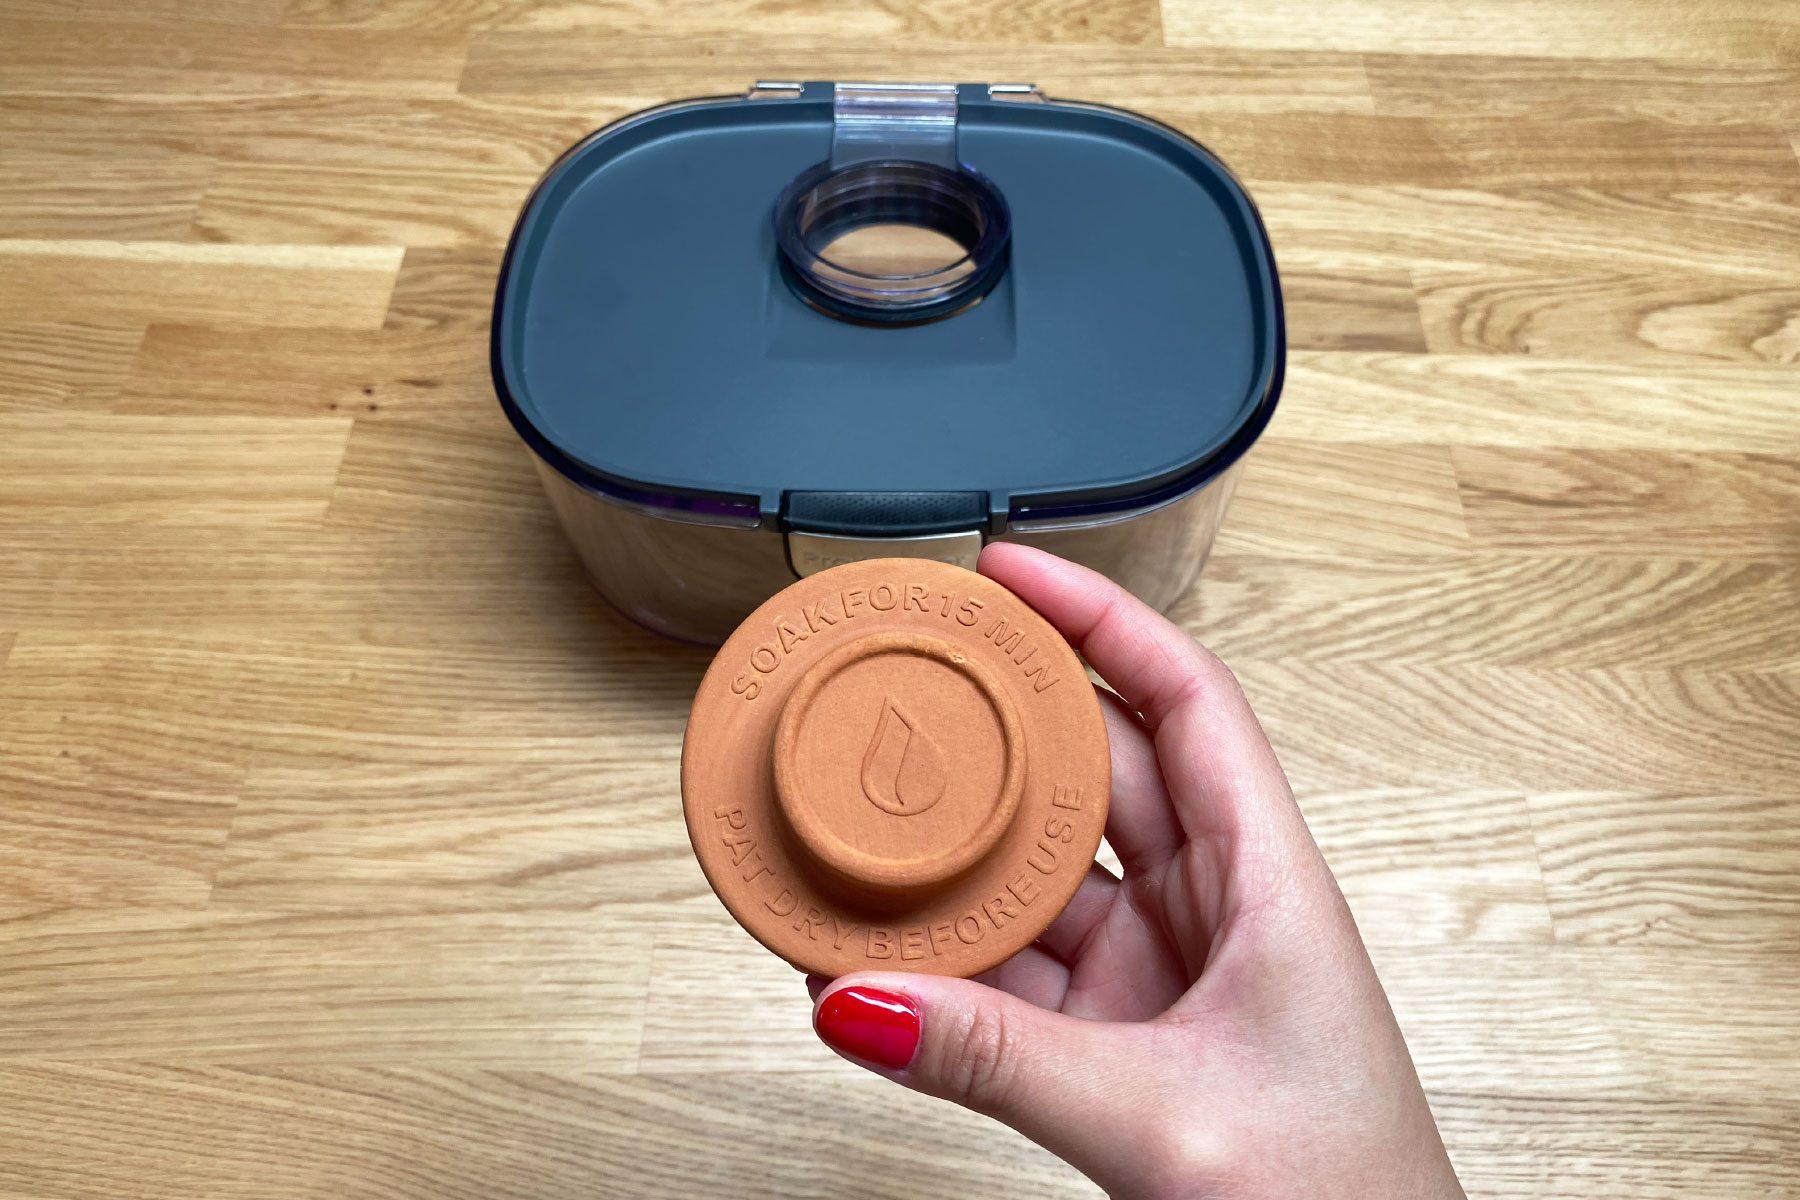 Prokeeper+ Cookie Storage Container - King Arthur Baking Company